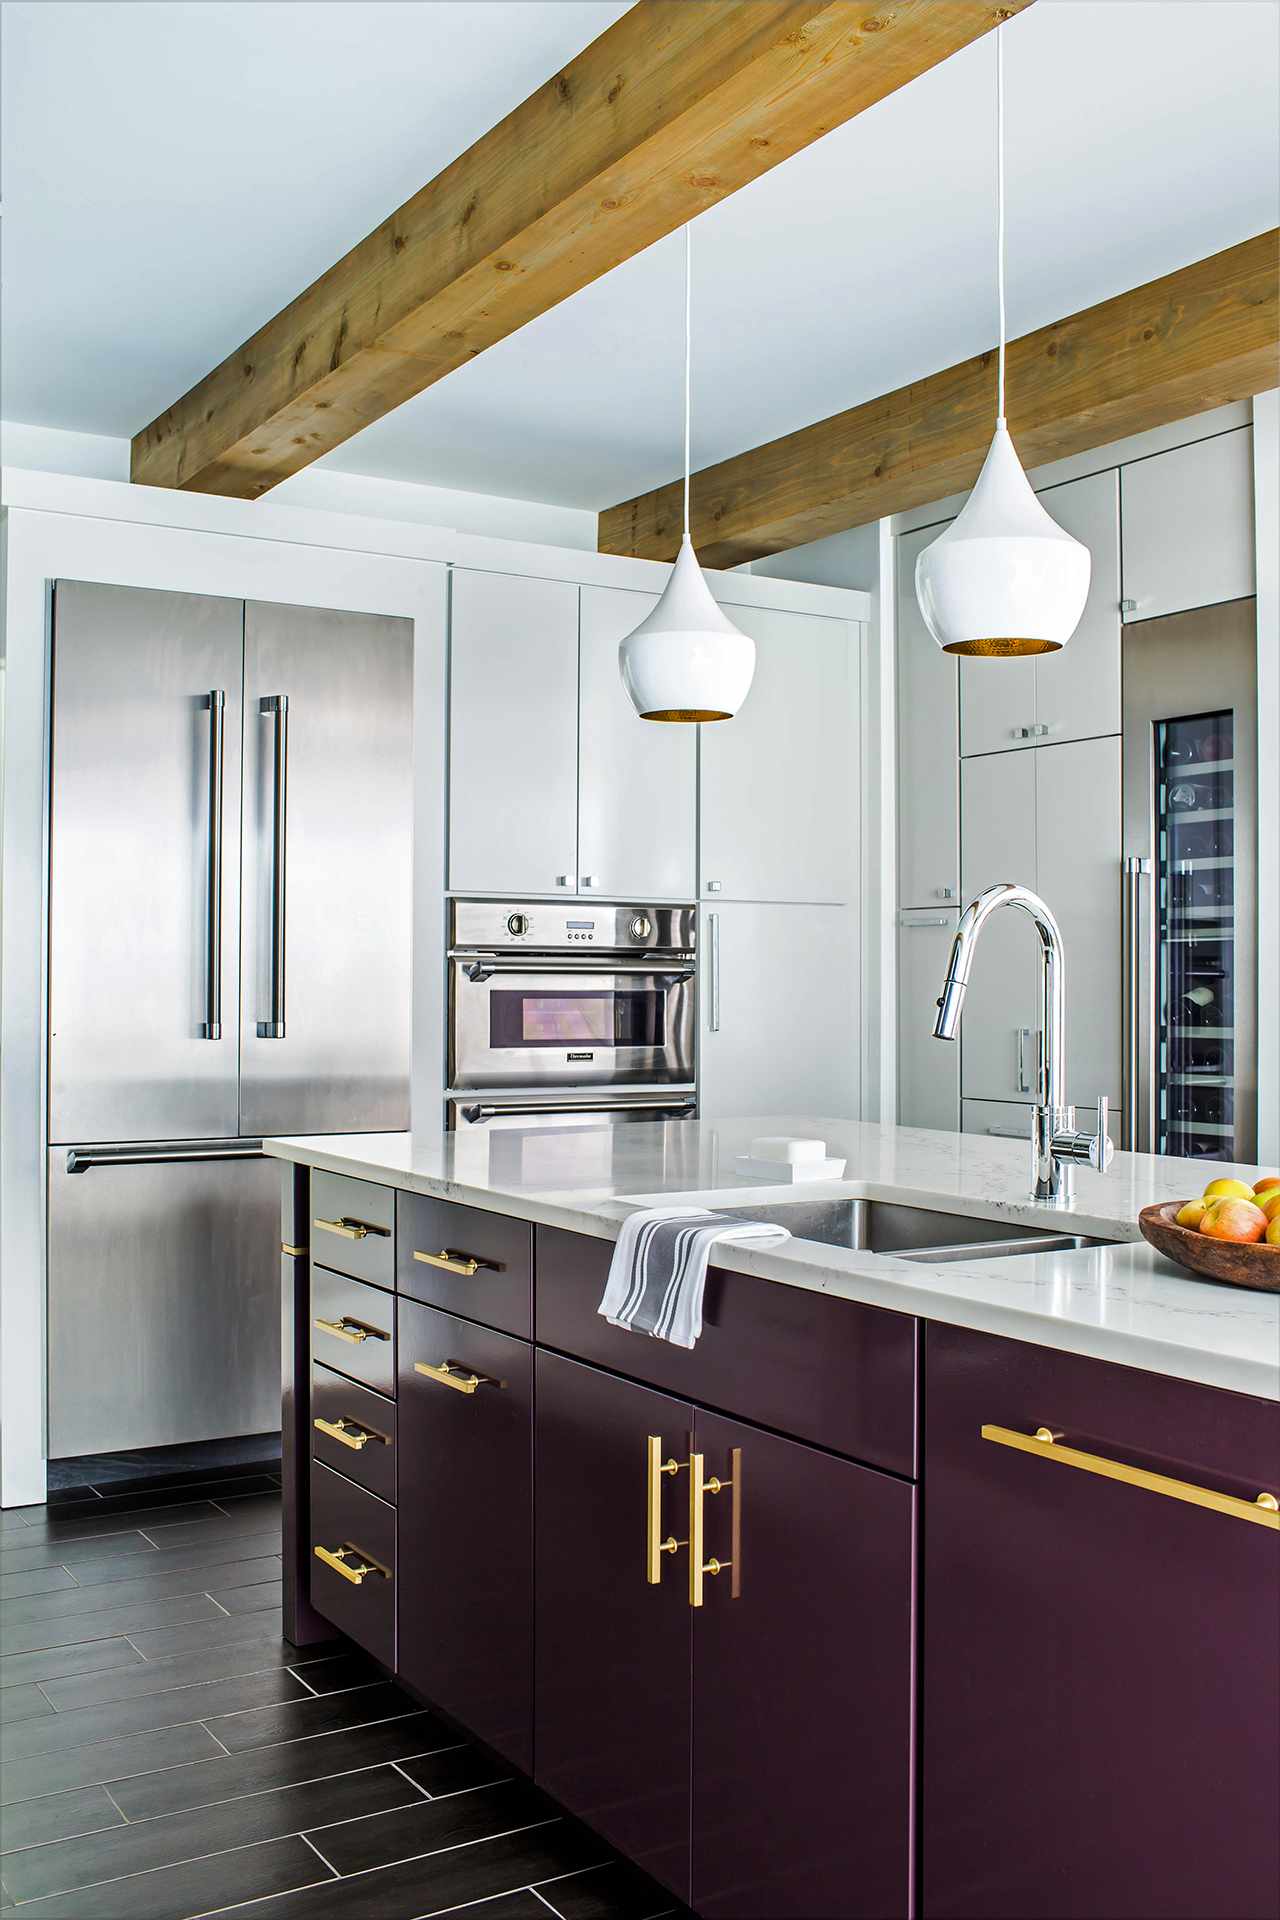 22 Kitchen Cabinetry Trends You Ll Love, Kitchen Cabinet Hardware Ideas 2019